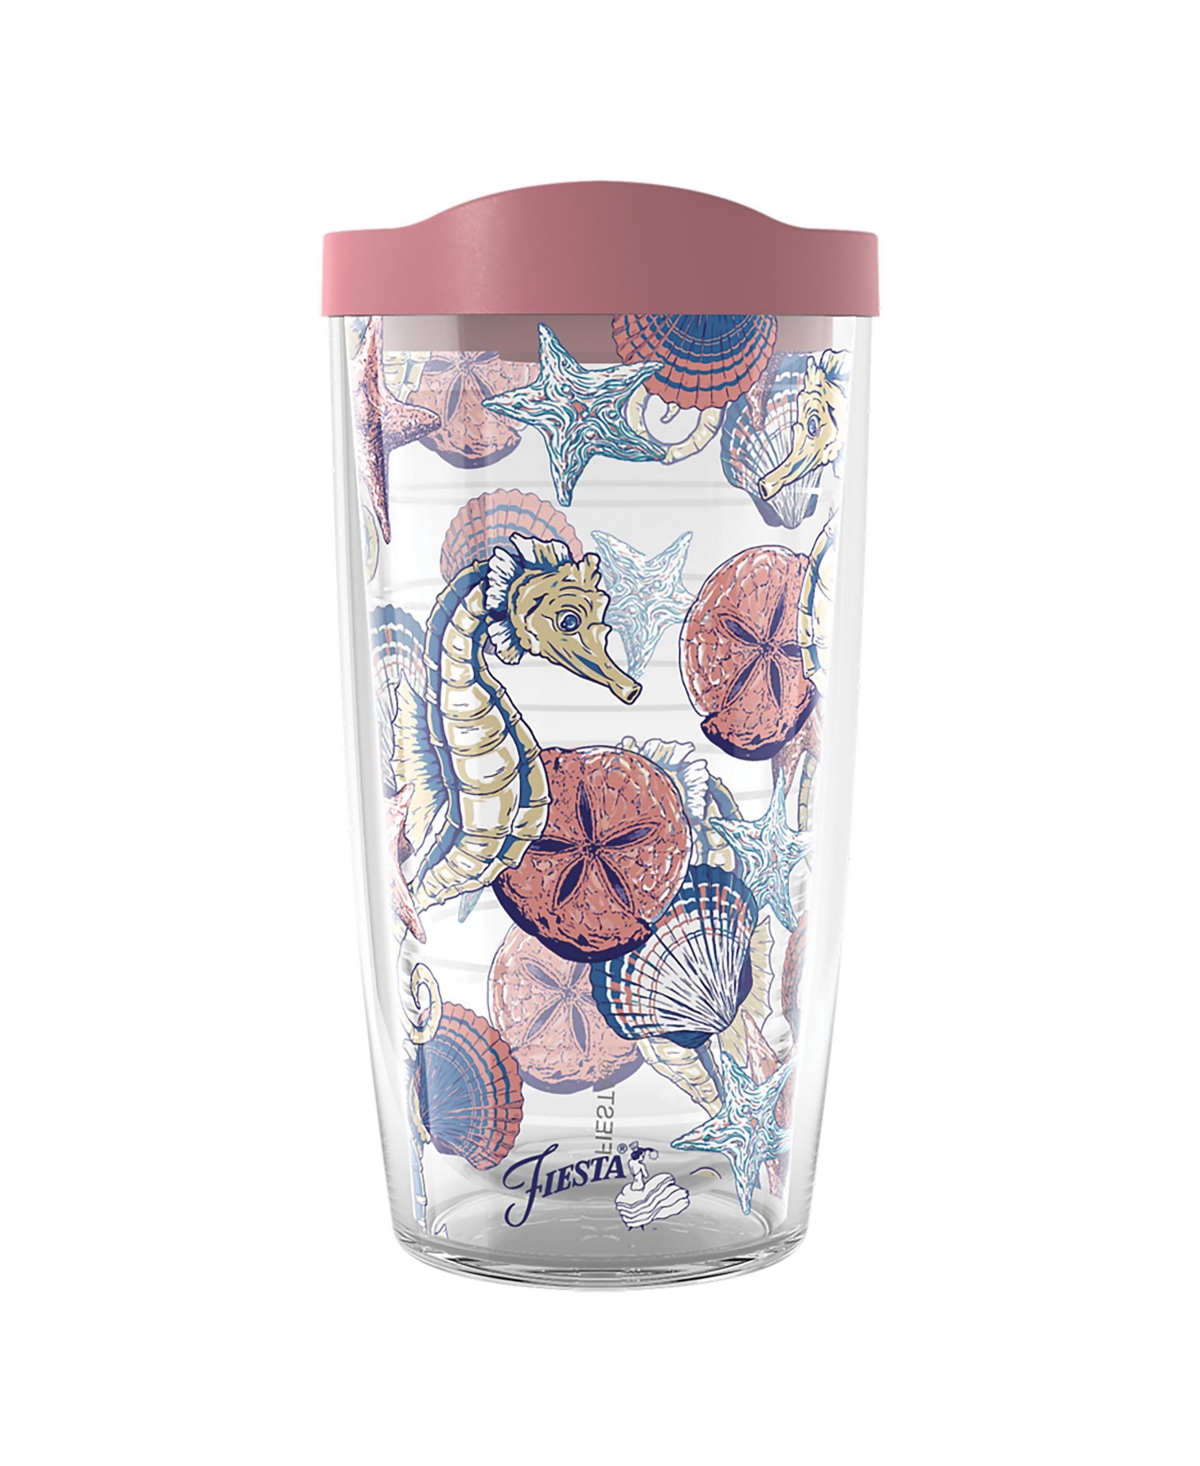 Tervis Tumbler Tervis Fiesta Sea Horsing Around Made In Usa Double Walled Insulated Tumbler Travel Cup Keeps Drinks In Open Miscellaneous